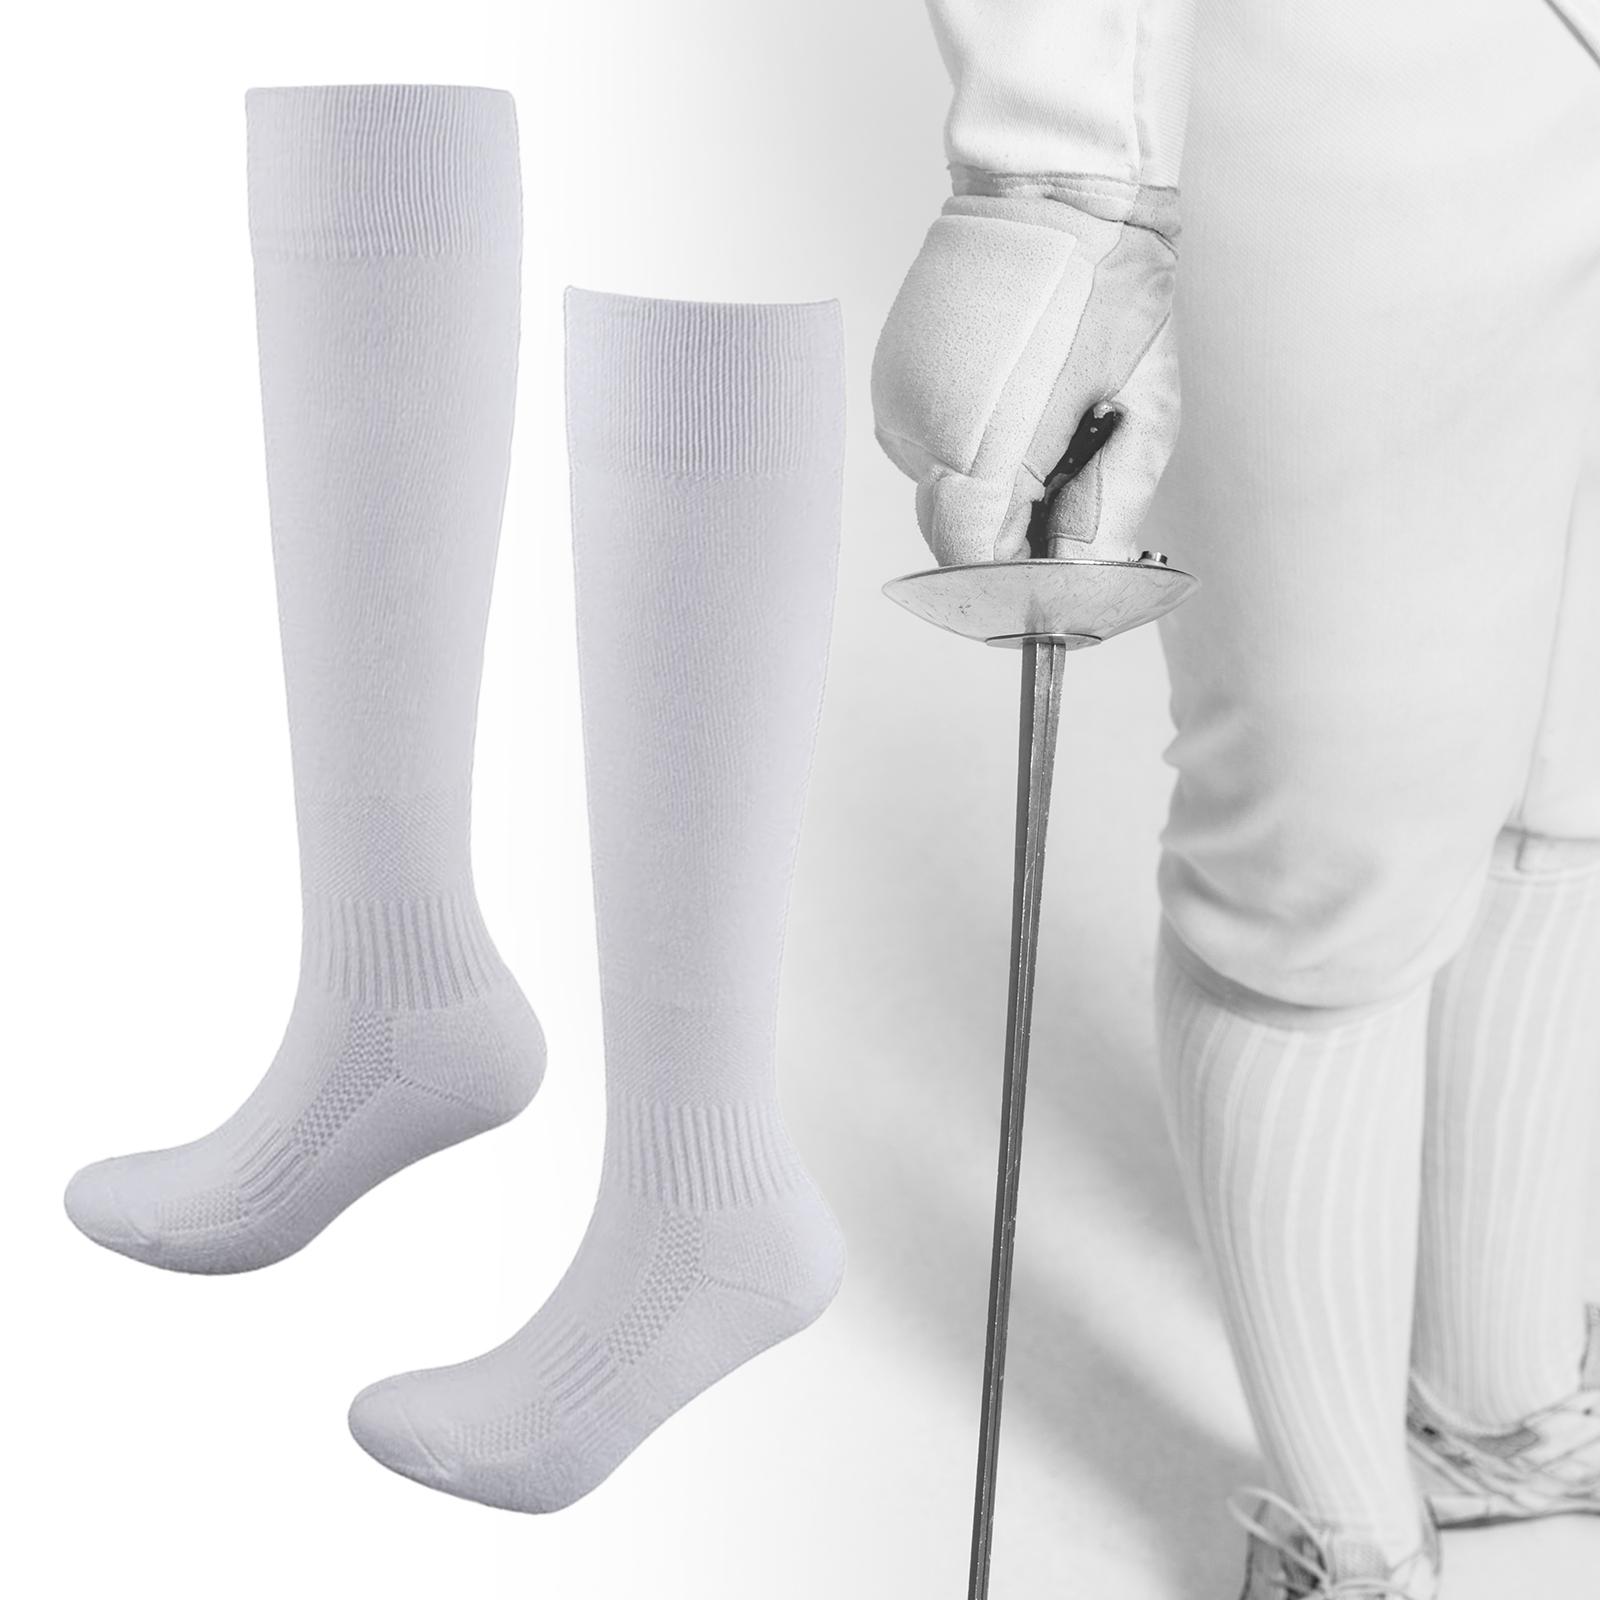 Fencing Socks Unisex Stretchy Unisex Fencing Stockings for Girls Adult XL White 